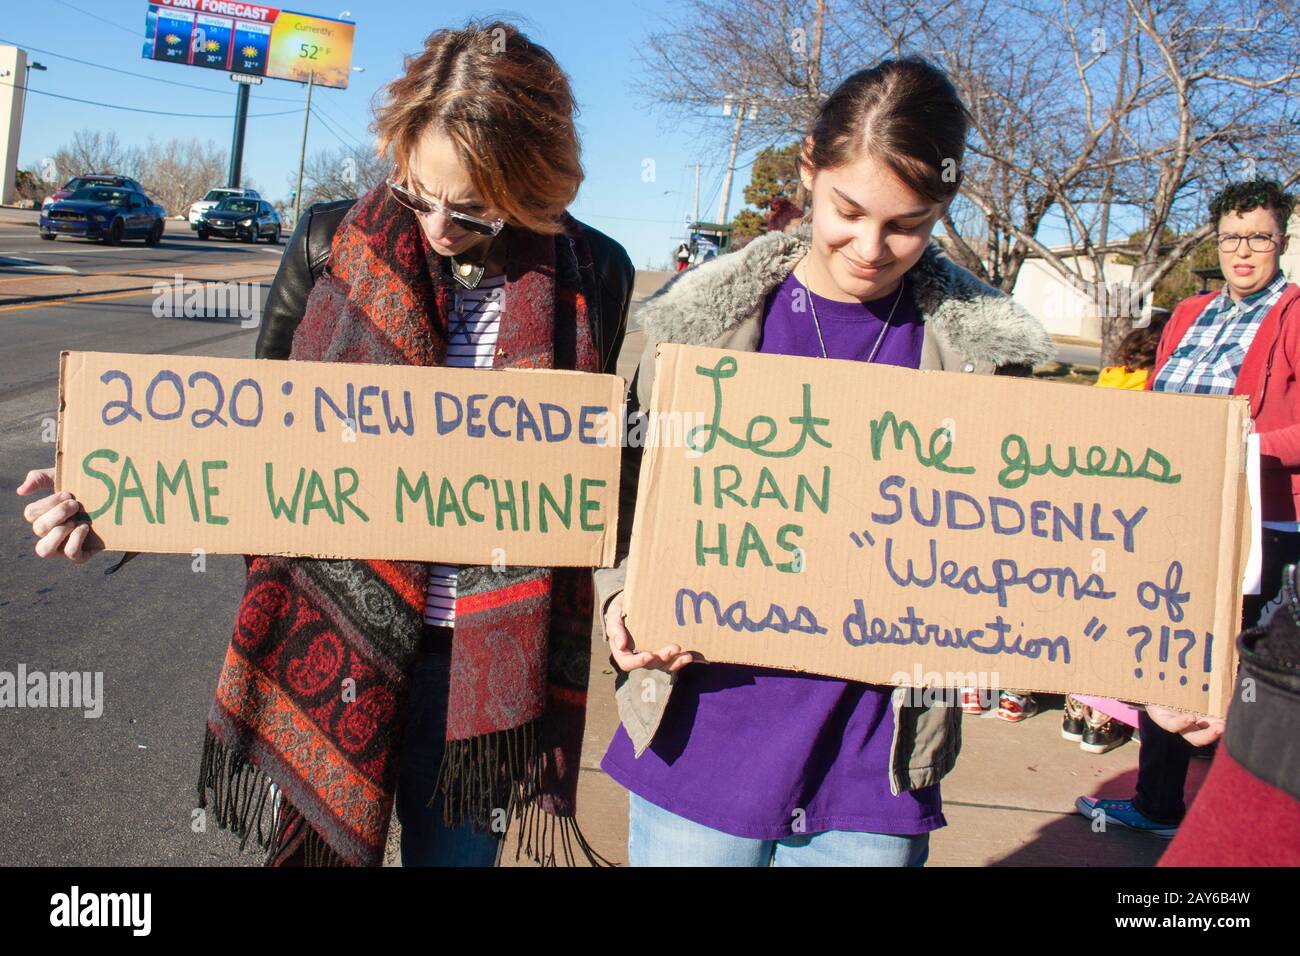 01-04-2020 Tulsa USA - Mother and Daughter with protest signs - one says Let me guess - Iran suddenly has weapons of mass destruction Stock Photo